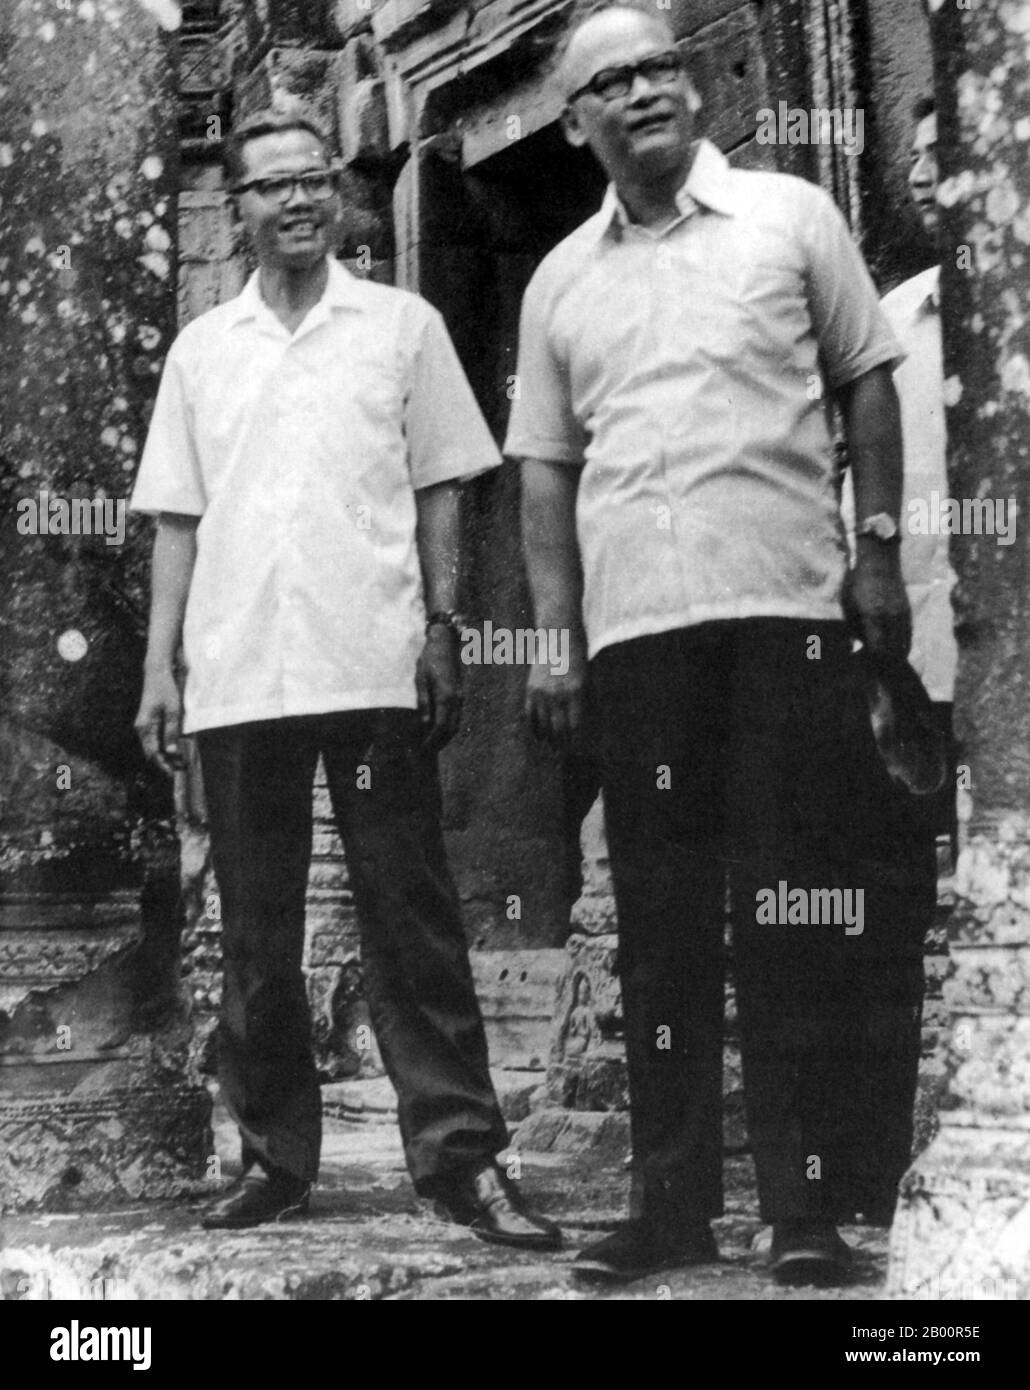 Cambodia: Son Sen (1930–1997), Defense Minister of Democratic Kampuchea, with unidentified foreign visitor at Angkor, c.1976-77.  Son Sen (June 12, 1930 – June 10, 1997), member of the Central Committee of the Communist Party of Kampuchea, aka the Khmer Rouge, from 1974 to 1992, Sen oversaw the Party's security apparatus, including the Santebal secret police and the notorious security prison S-21 at Tuol Sleng. Along with the rest of his family, he was killed on the orders of Pol Pot during a 1997 factional split in the Khmer Rouge at Anlong Veng. Stock Photo